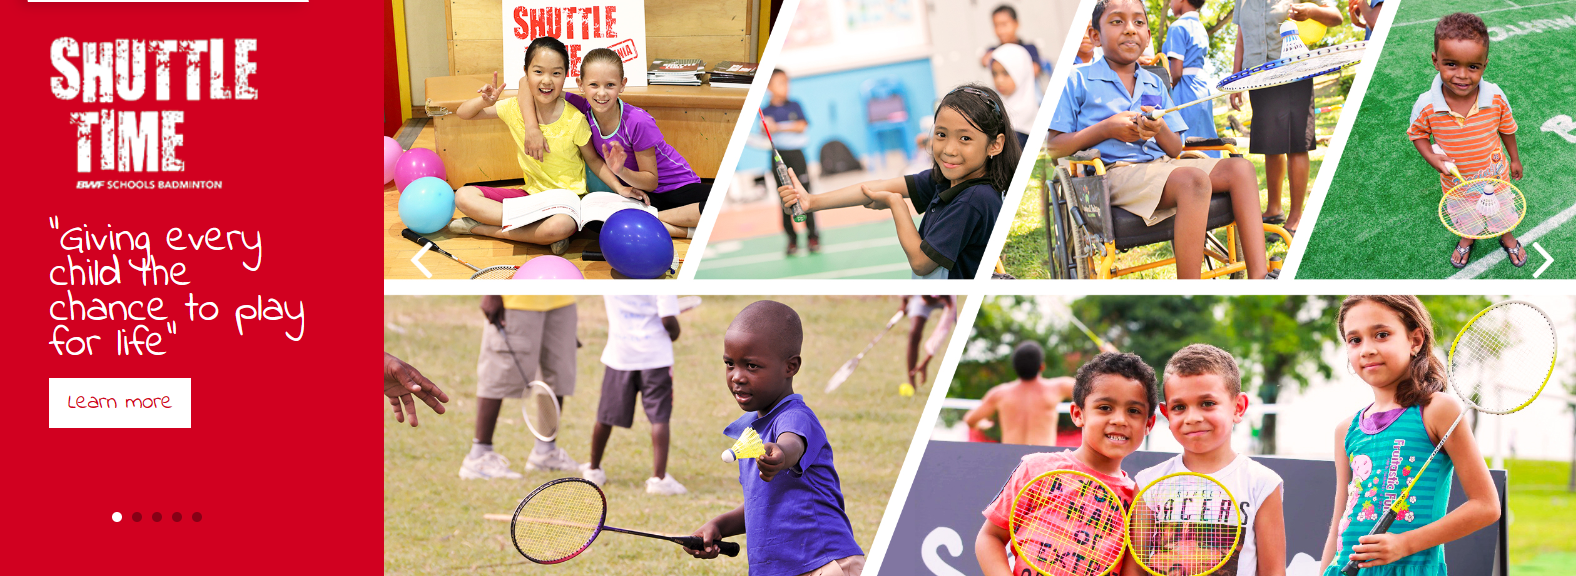 The BWF's Shuttle Time programme is currentlhy allowing children in 140 countries to have free access to badminton facilities ©BWF